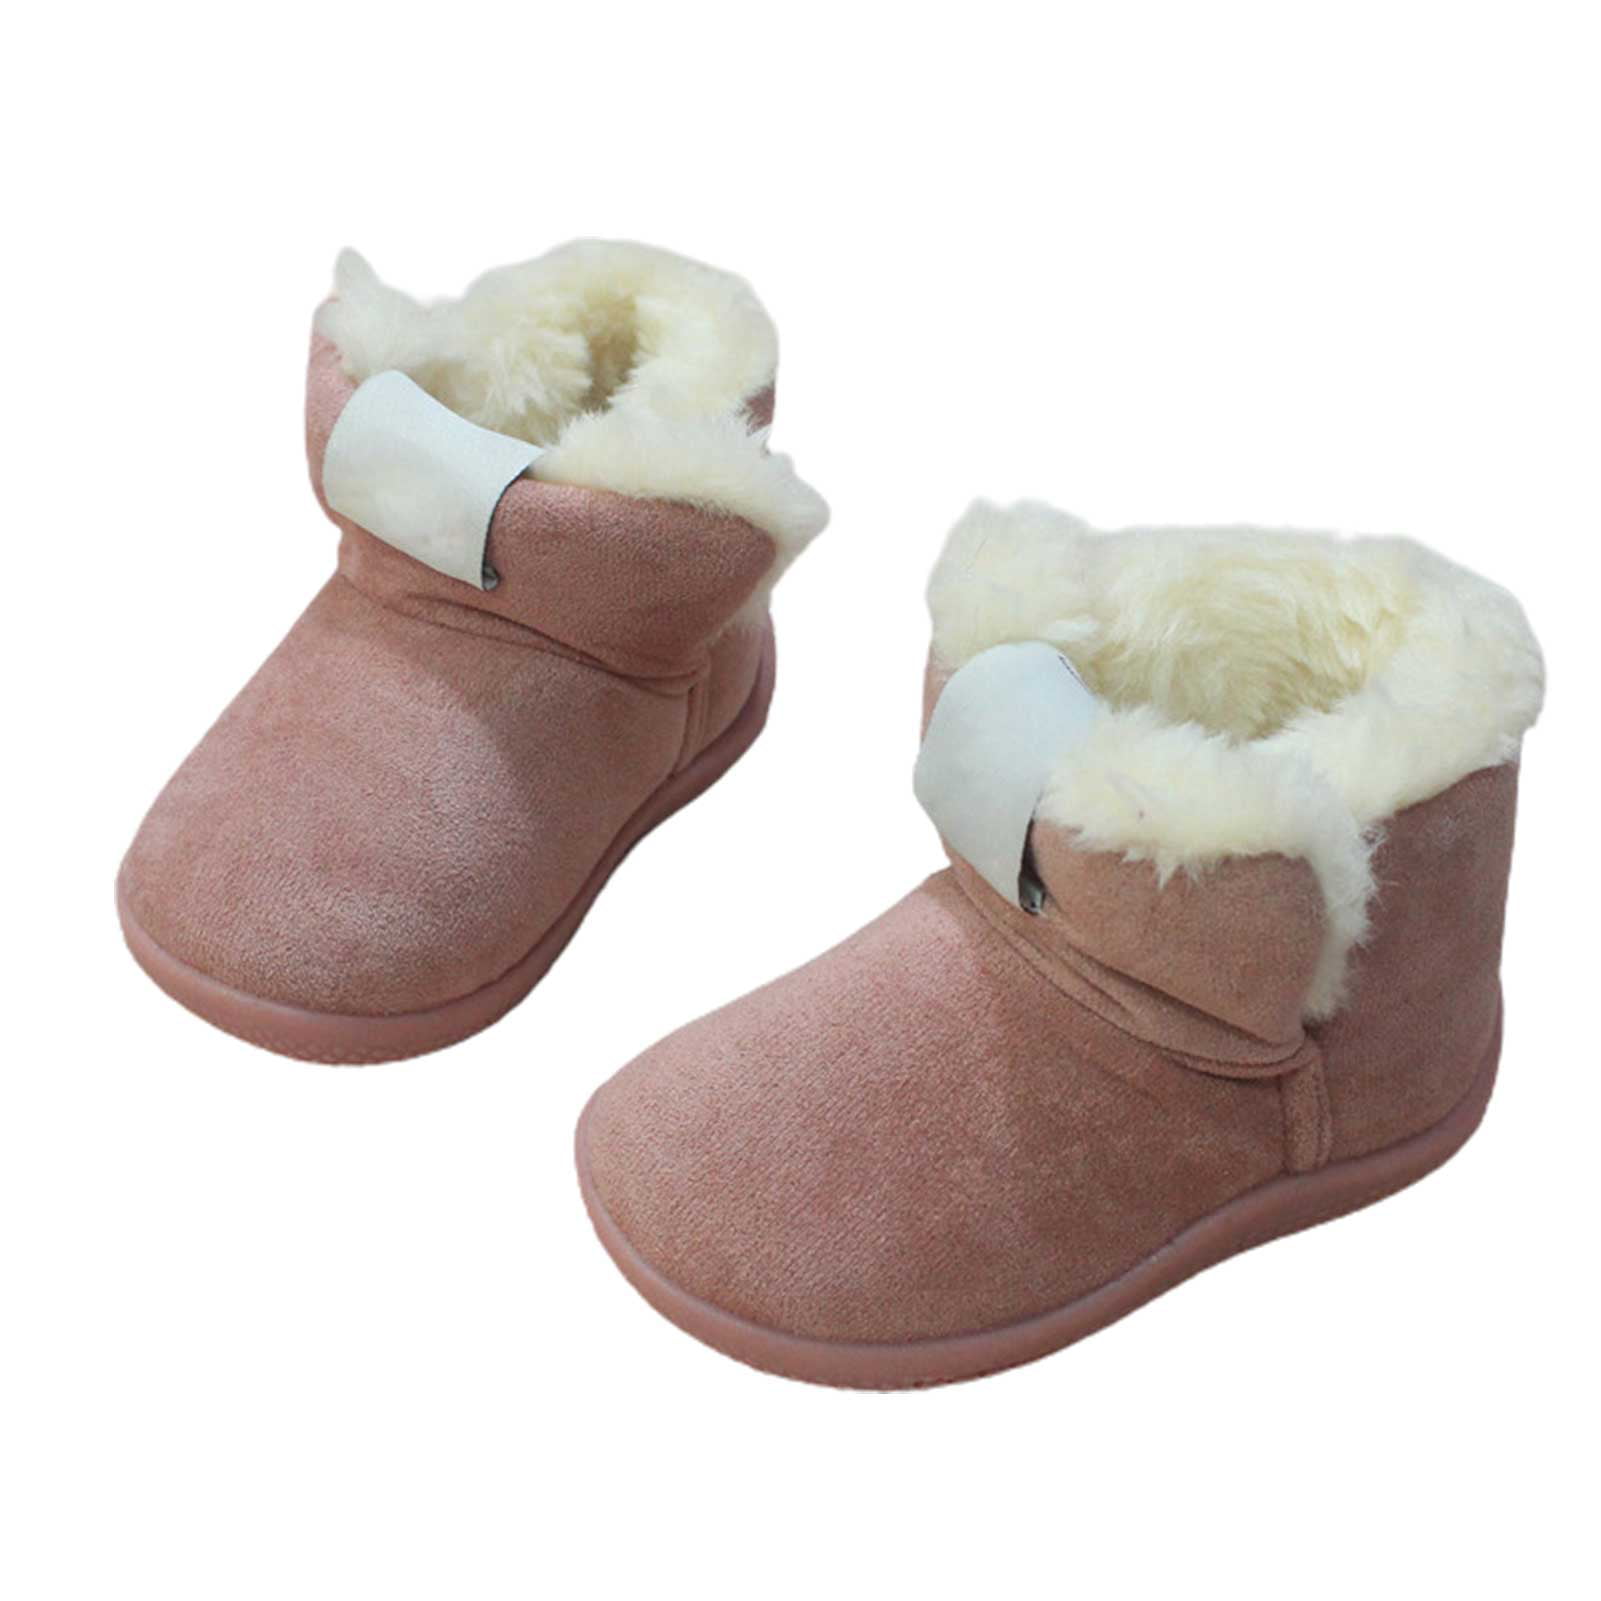 Kids Girls Toddler Baby Winter Soft Sole Snow Boots Suede Booties Martin Shoe